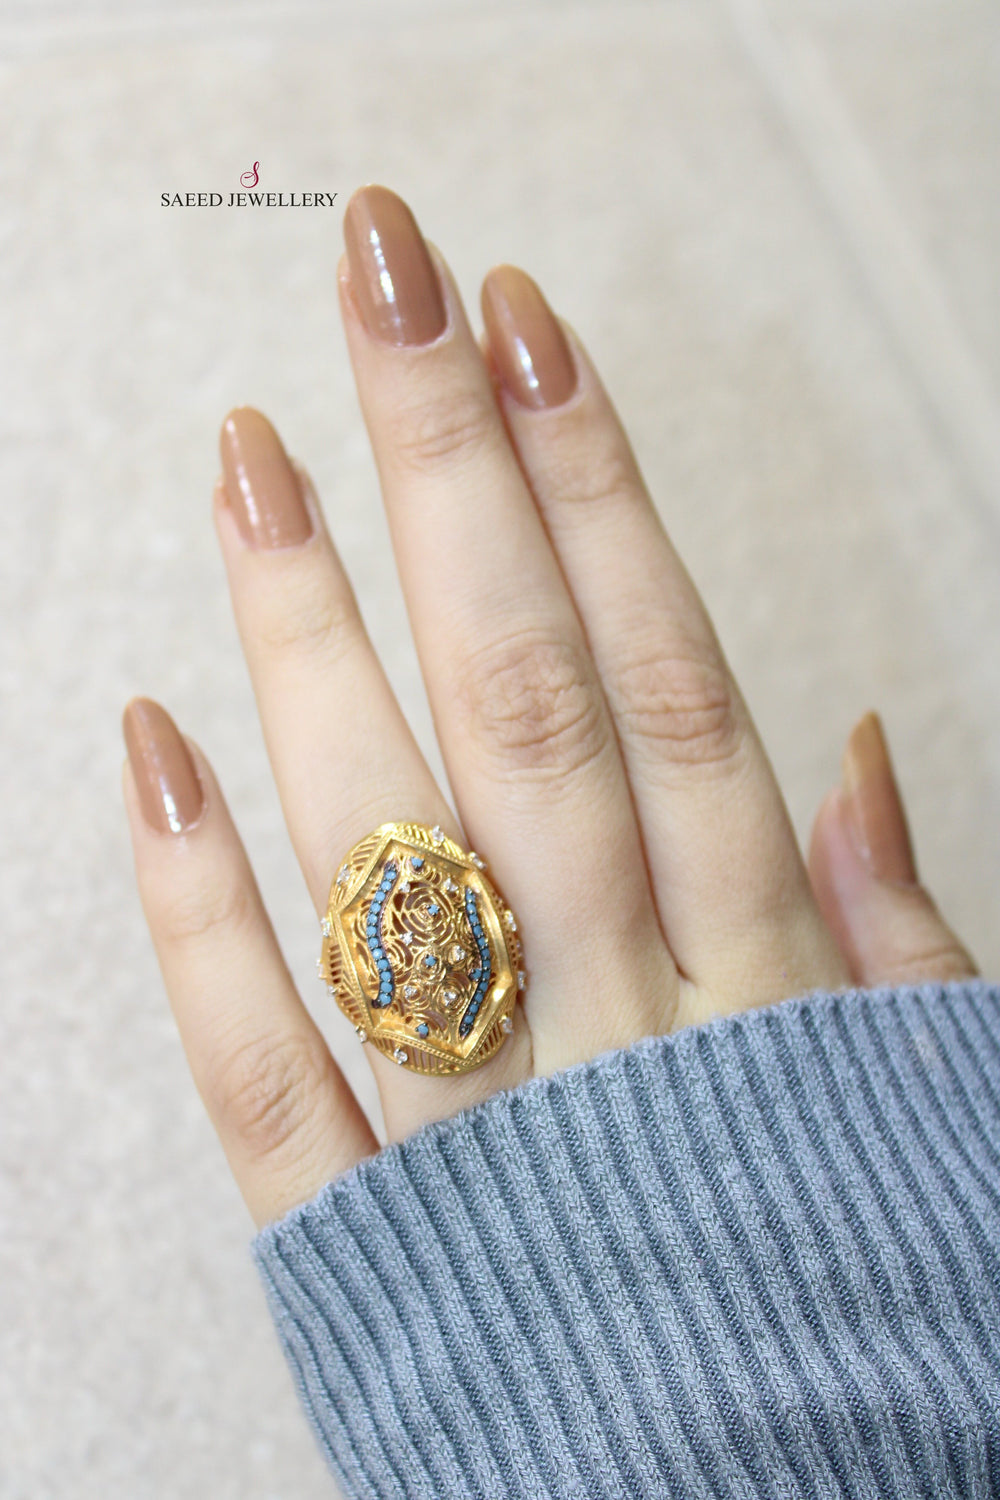 21K Fancy Zirconia Ring Made of 21K Yellow Gold by Saeed Jewelry-خاتم-محجر-اكسترا-7